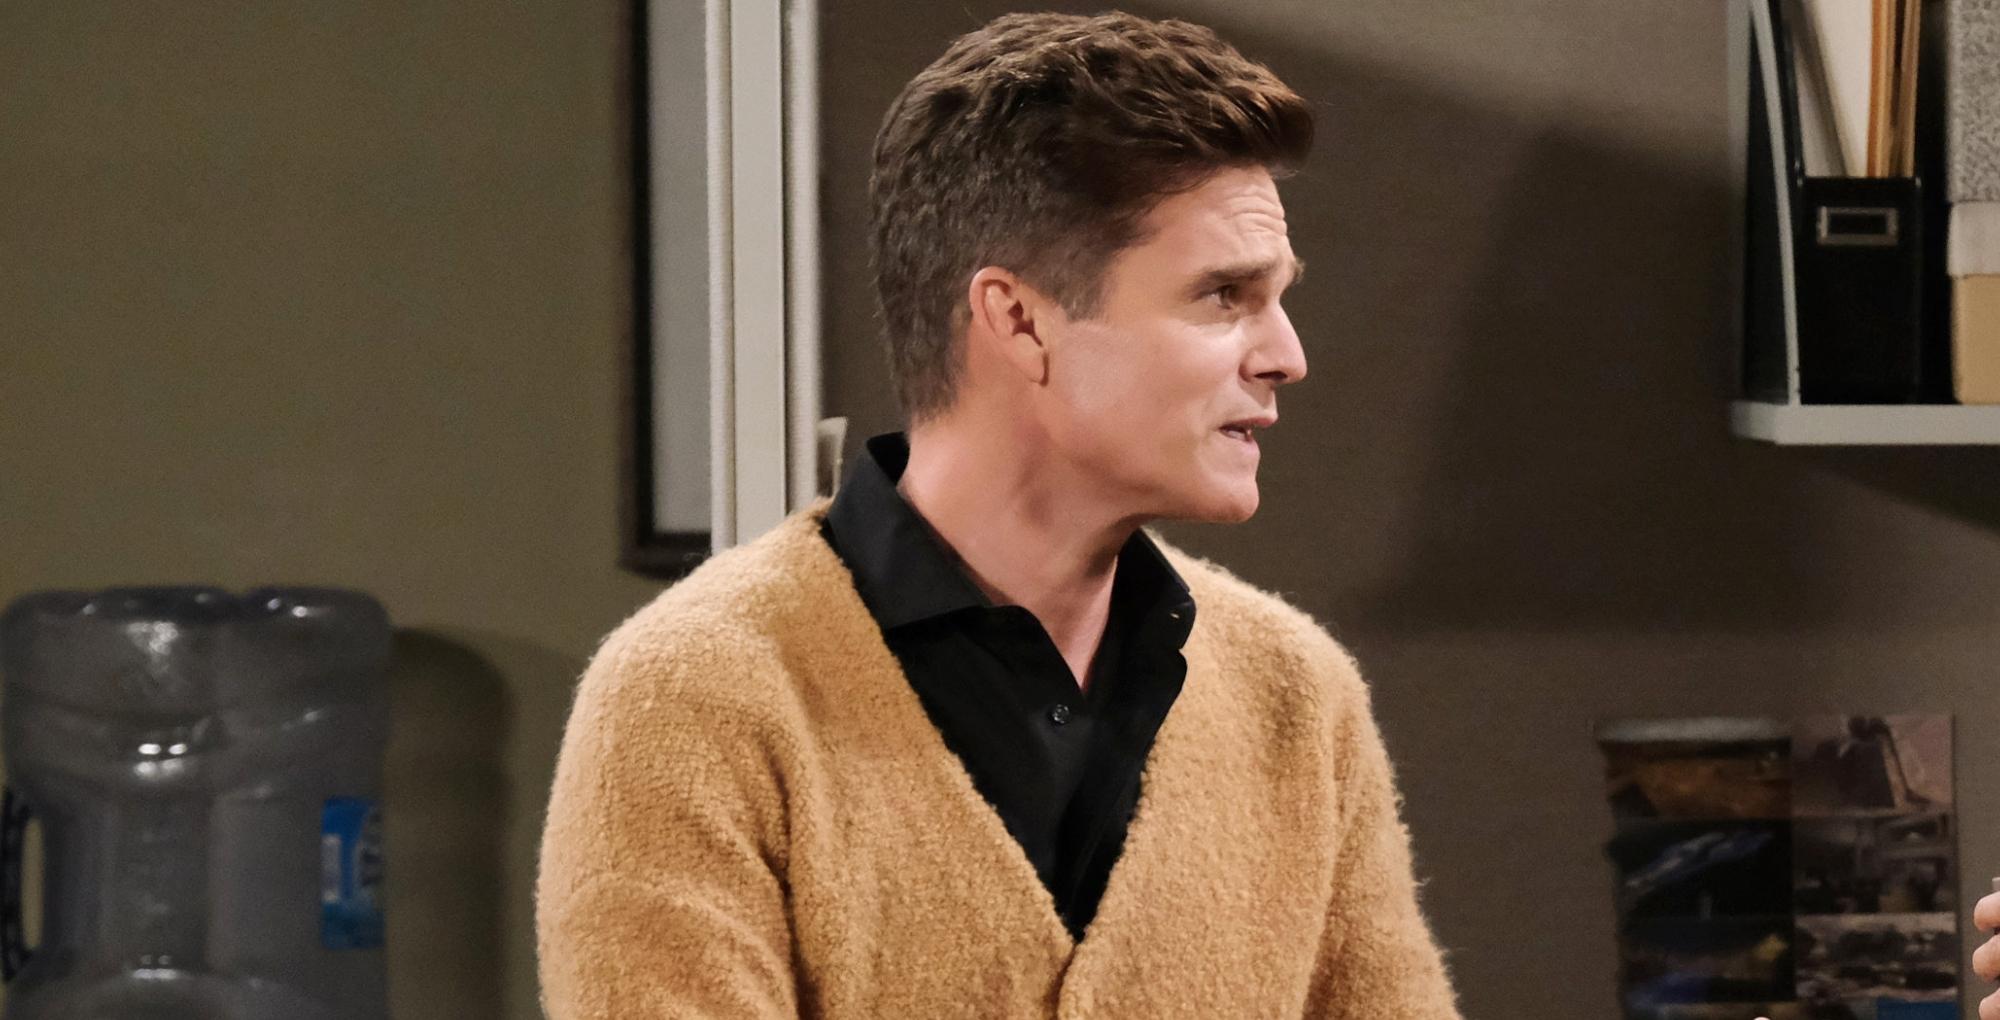 days of our lives spoilers for may 29, 2023, have leo stark butting in.